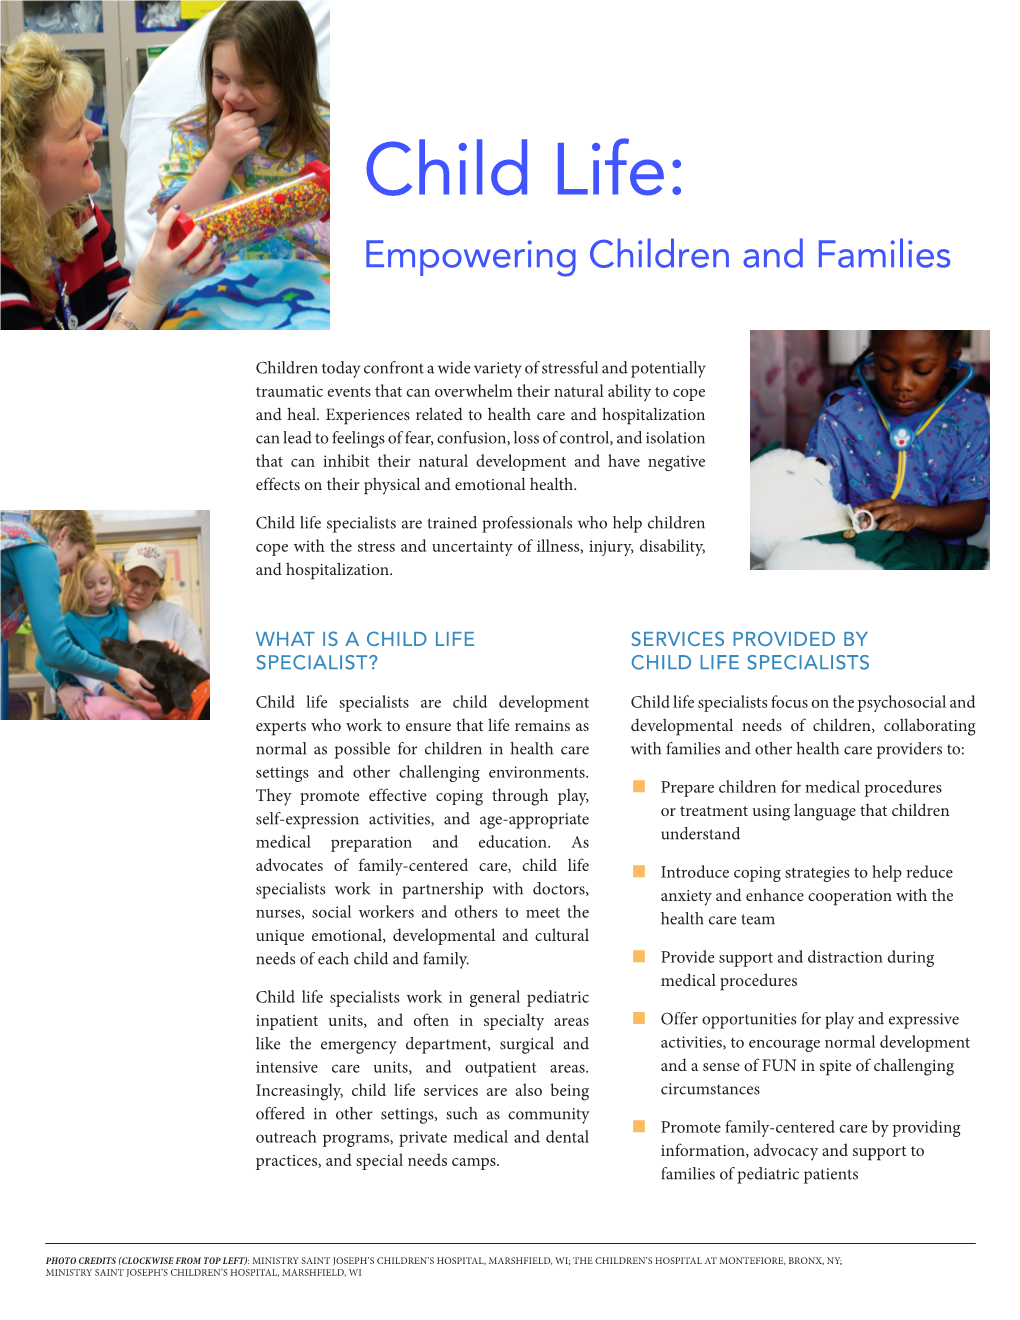 Empowering Children and Families